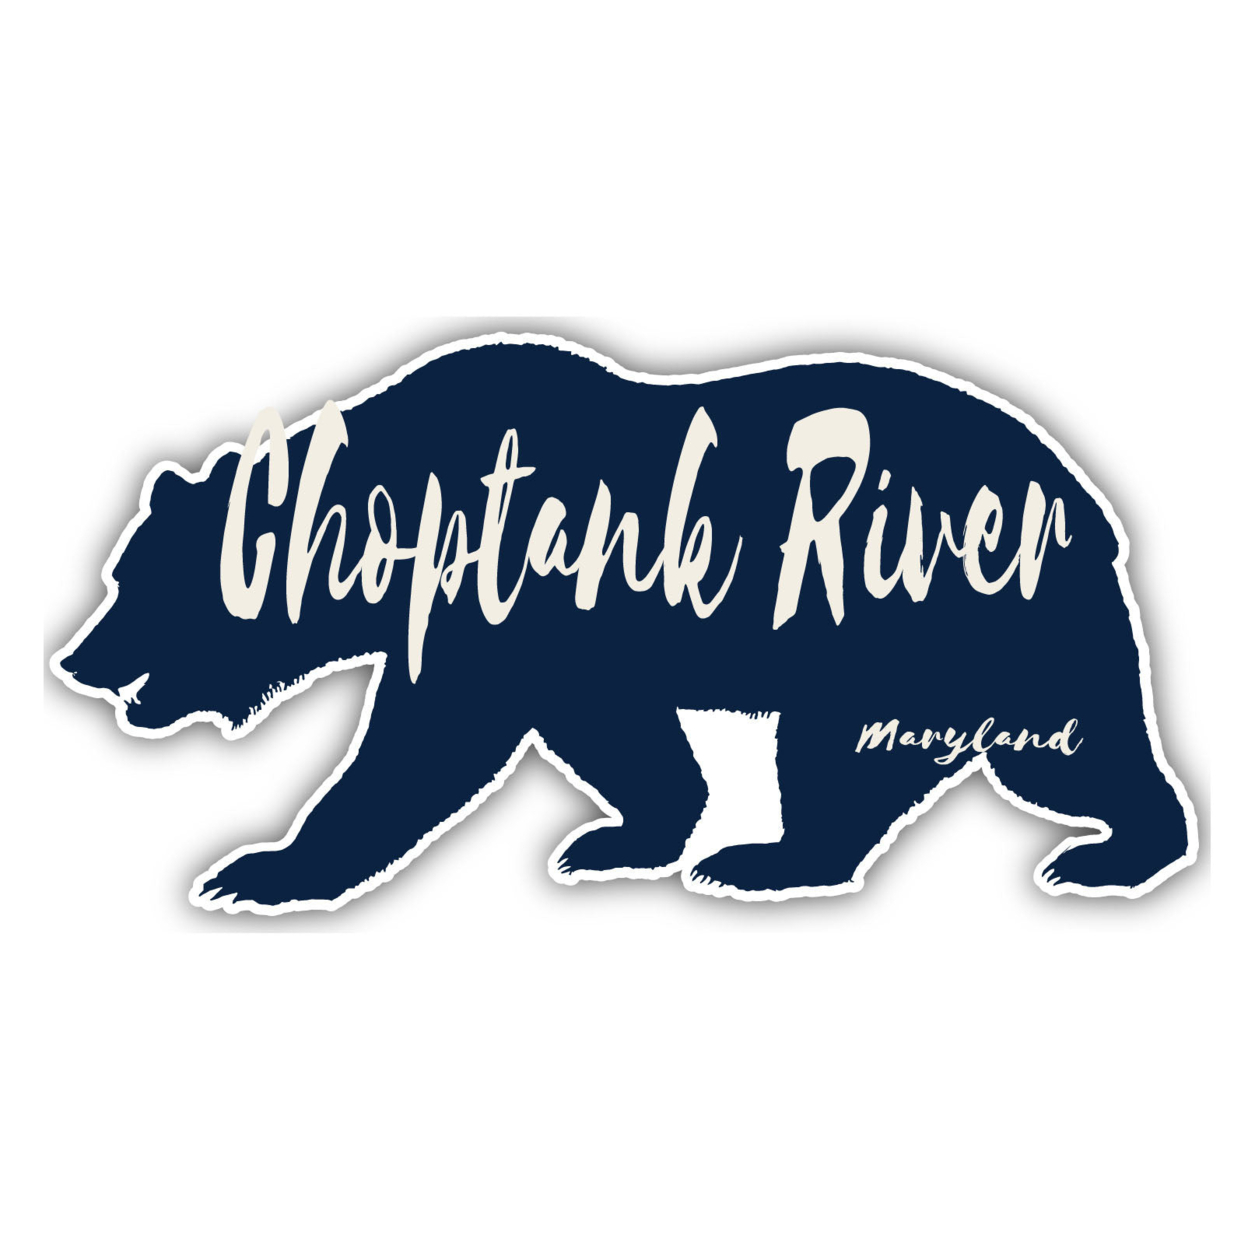 Choptank River Maryland Souvenir Decorative Stickers (Choose Theme And Size) - 4-Pack, 4-Inch, Bear